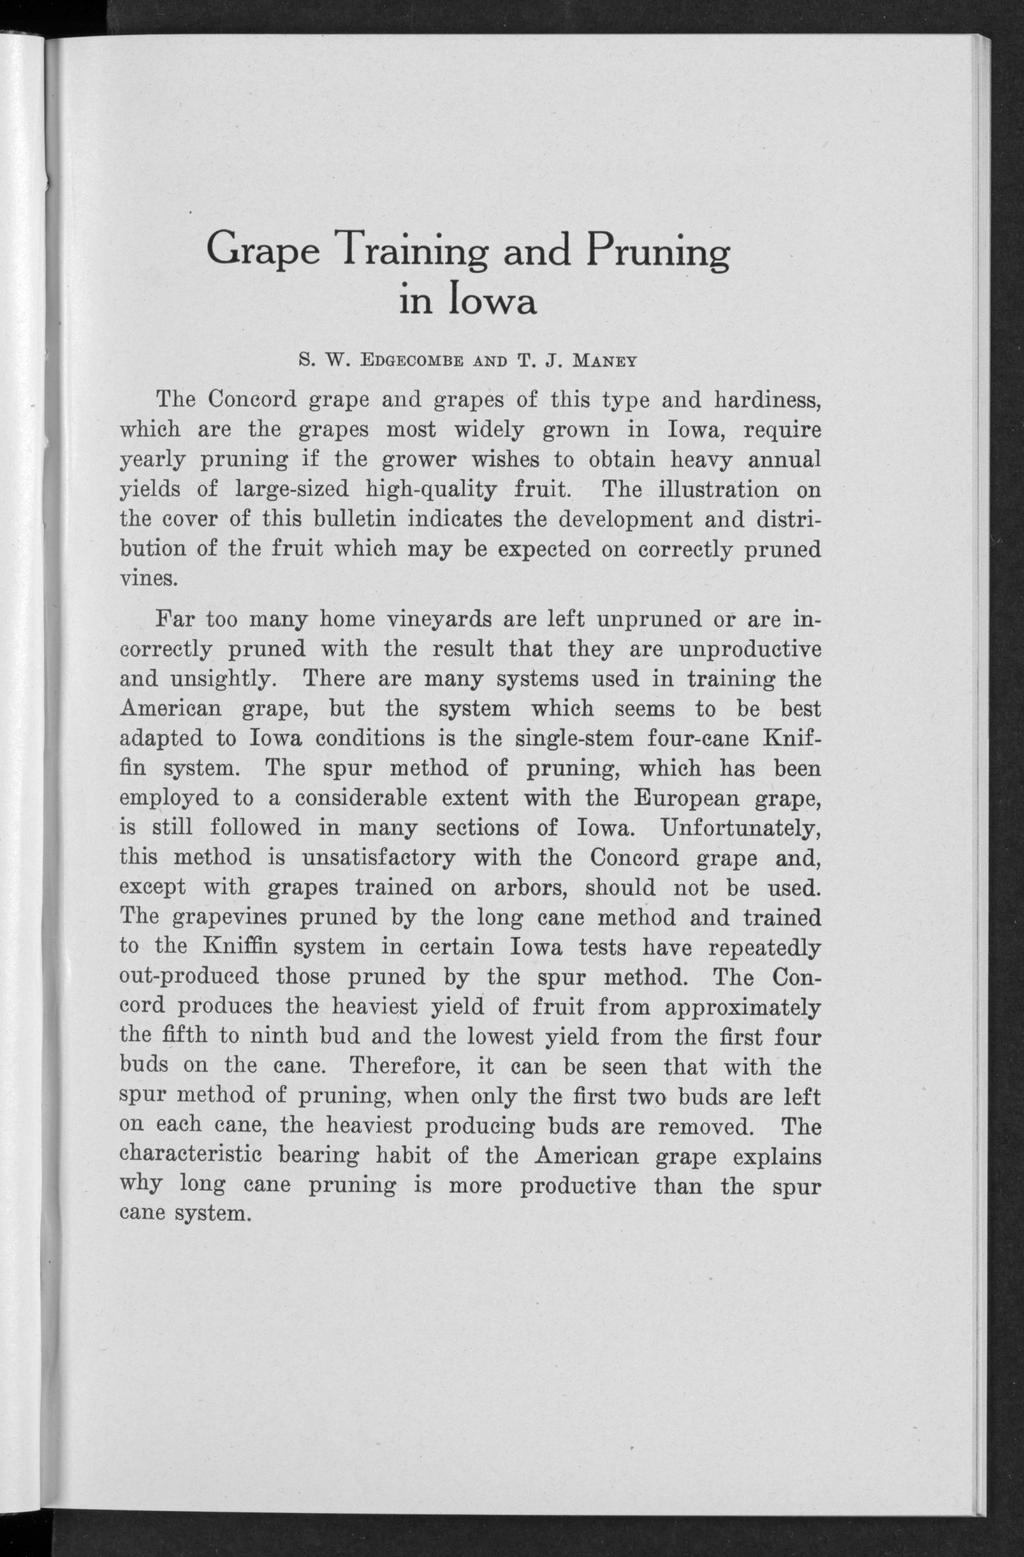 Edgecombe and Maney: Grape training and pruning in Iowa Grape Training and Pruning in Iowa S. W. Edgecombe and T. J.